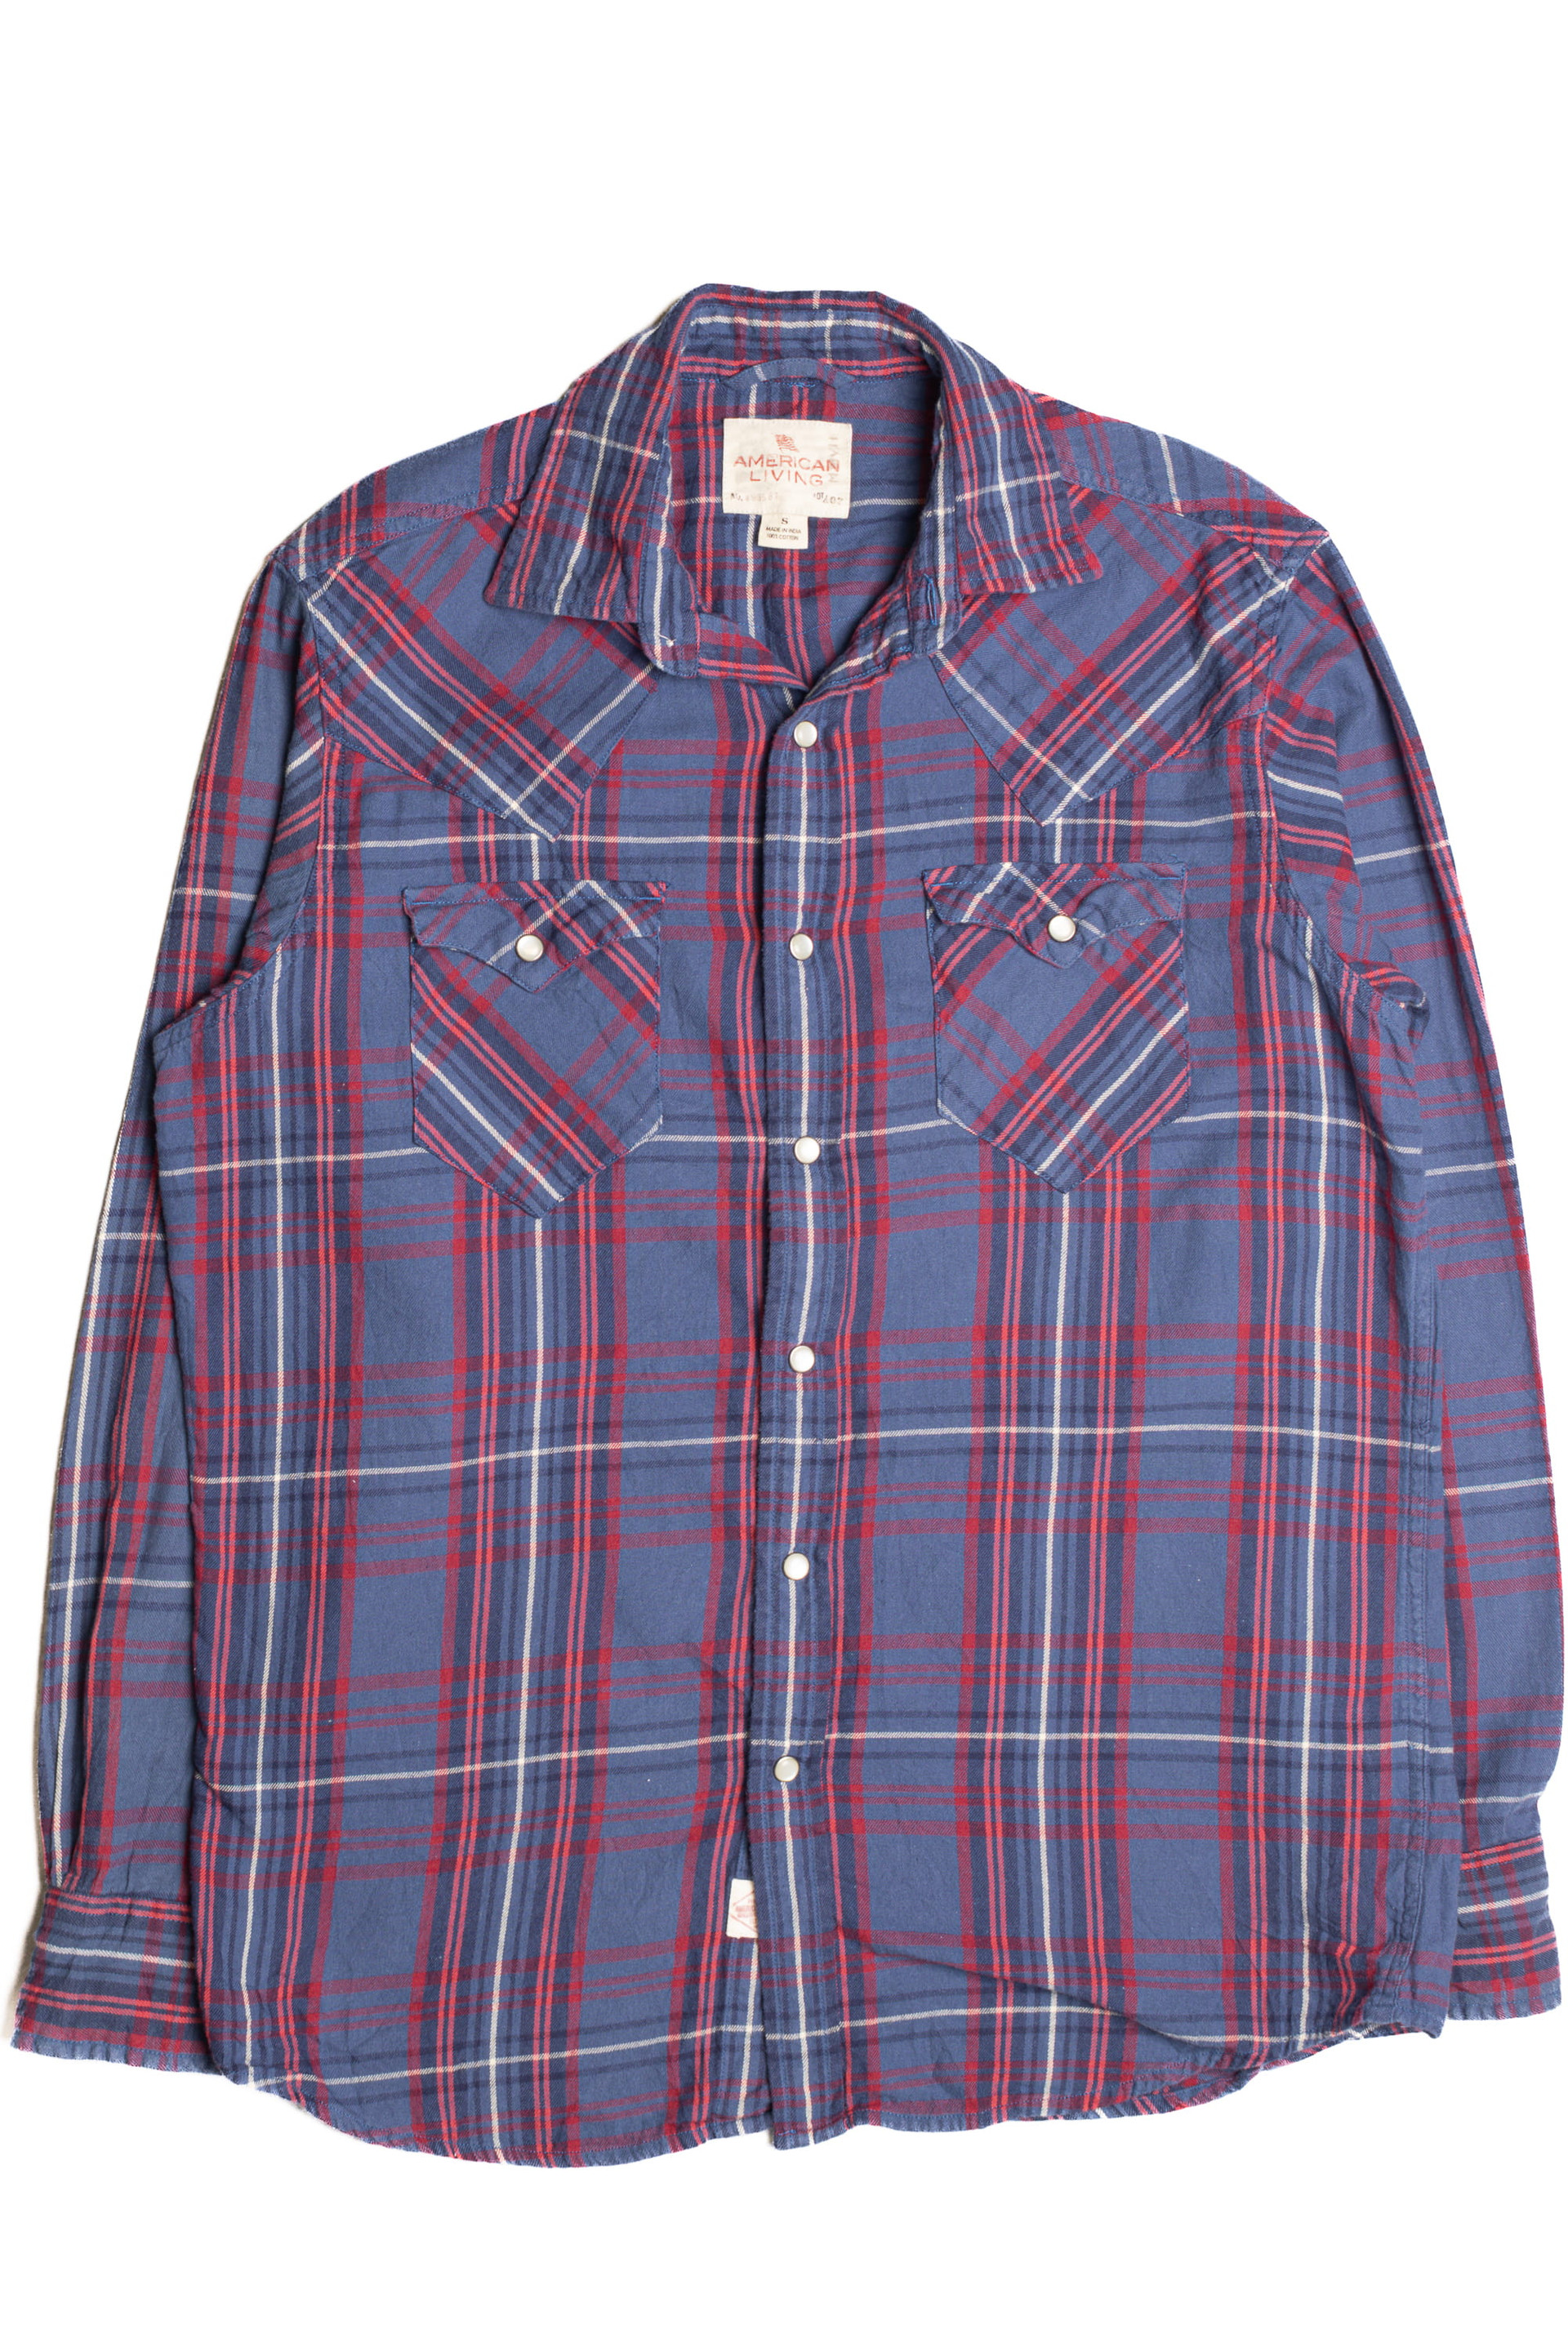 Recycled + Vintage Clothing - Vintage Flannel Shirts - Page 1 ...